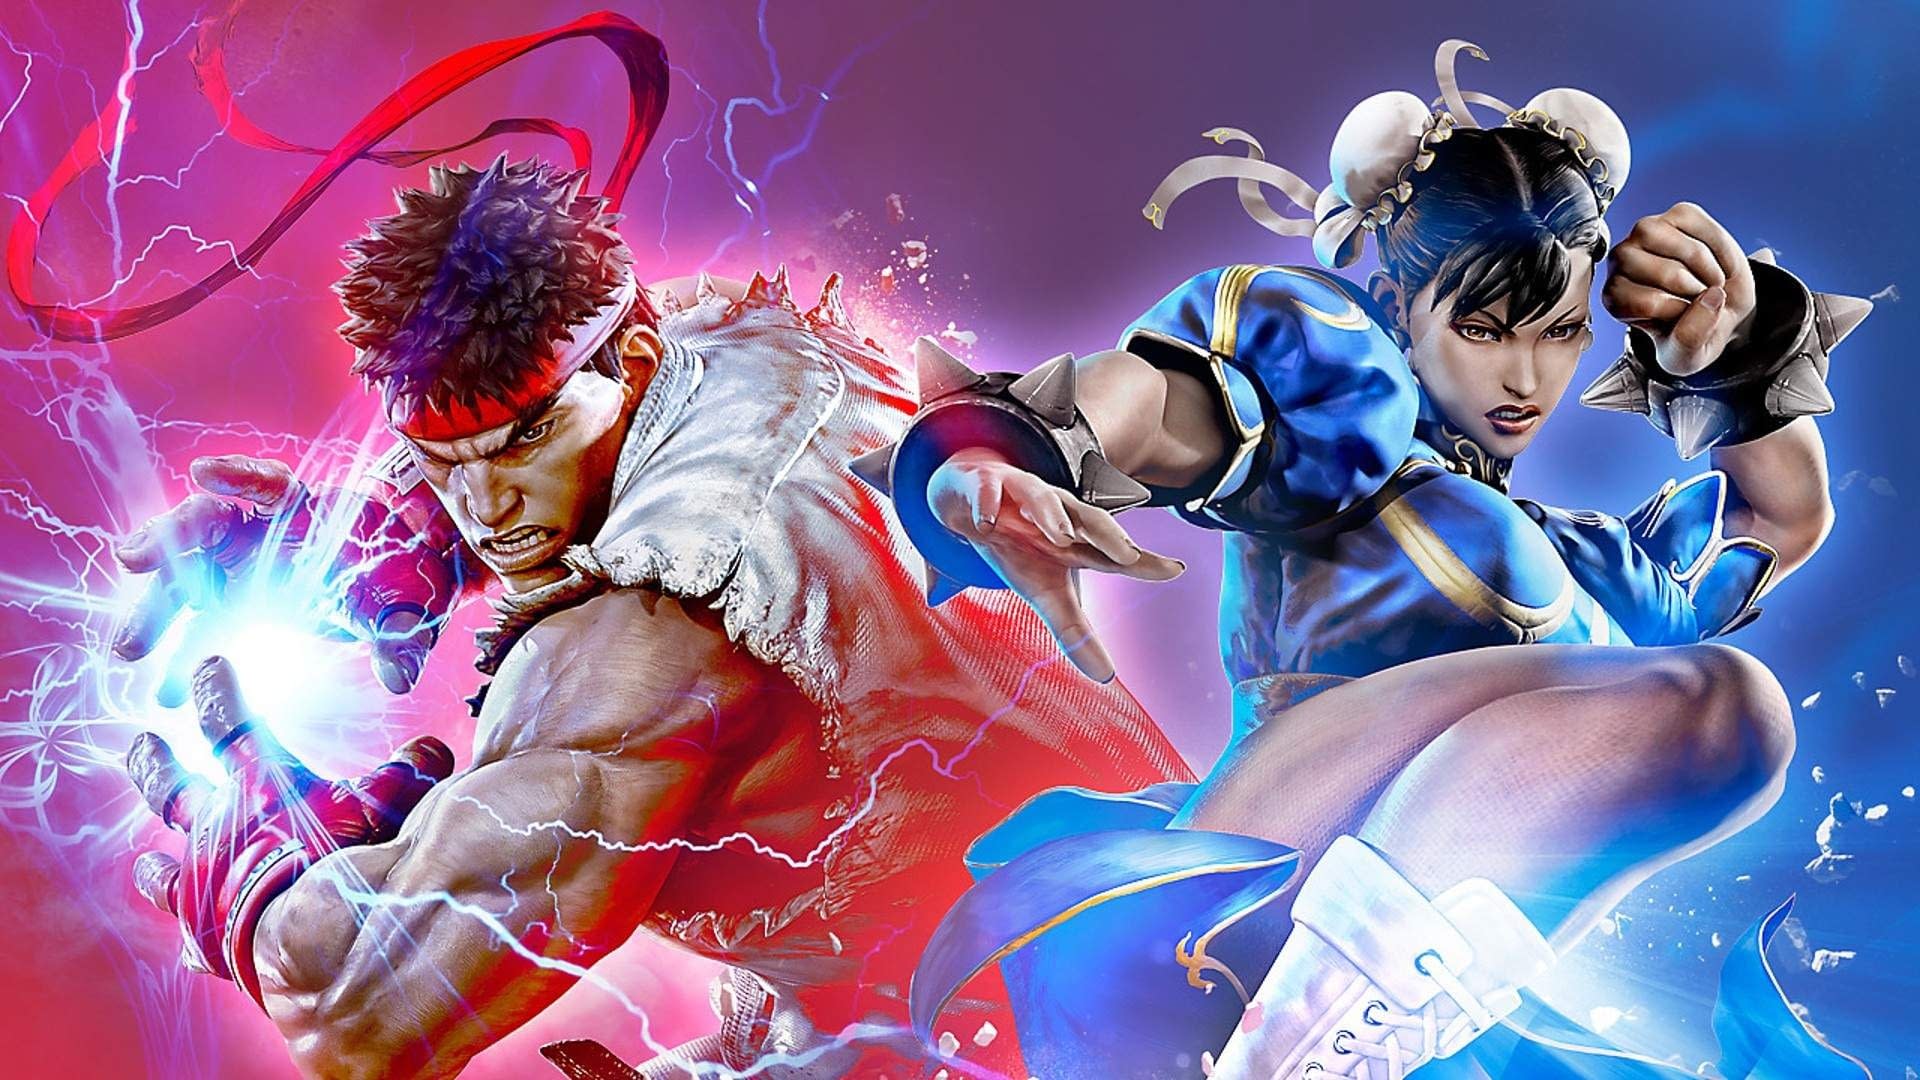 New screenshots released for Street Fighter 6